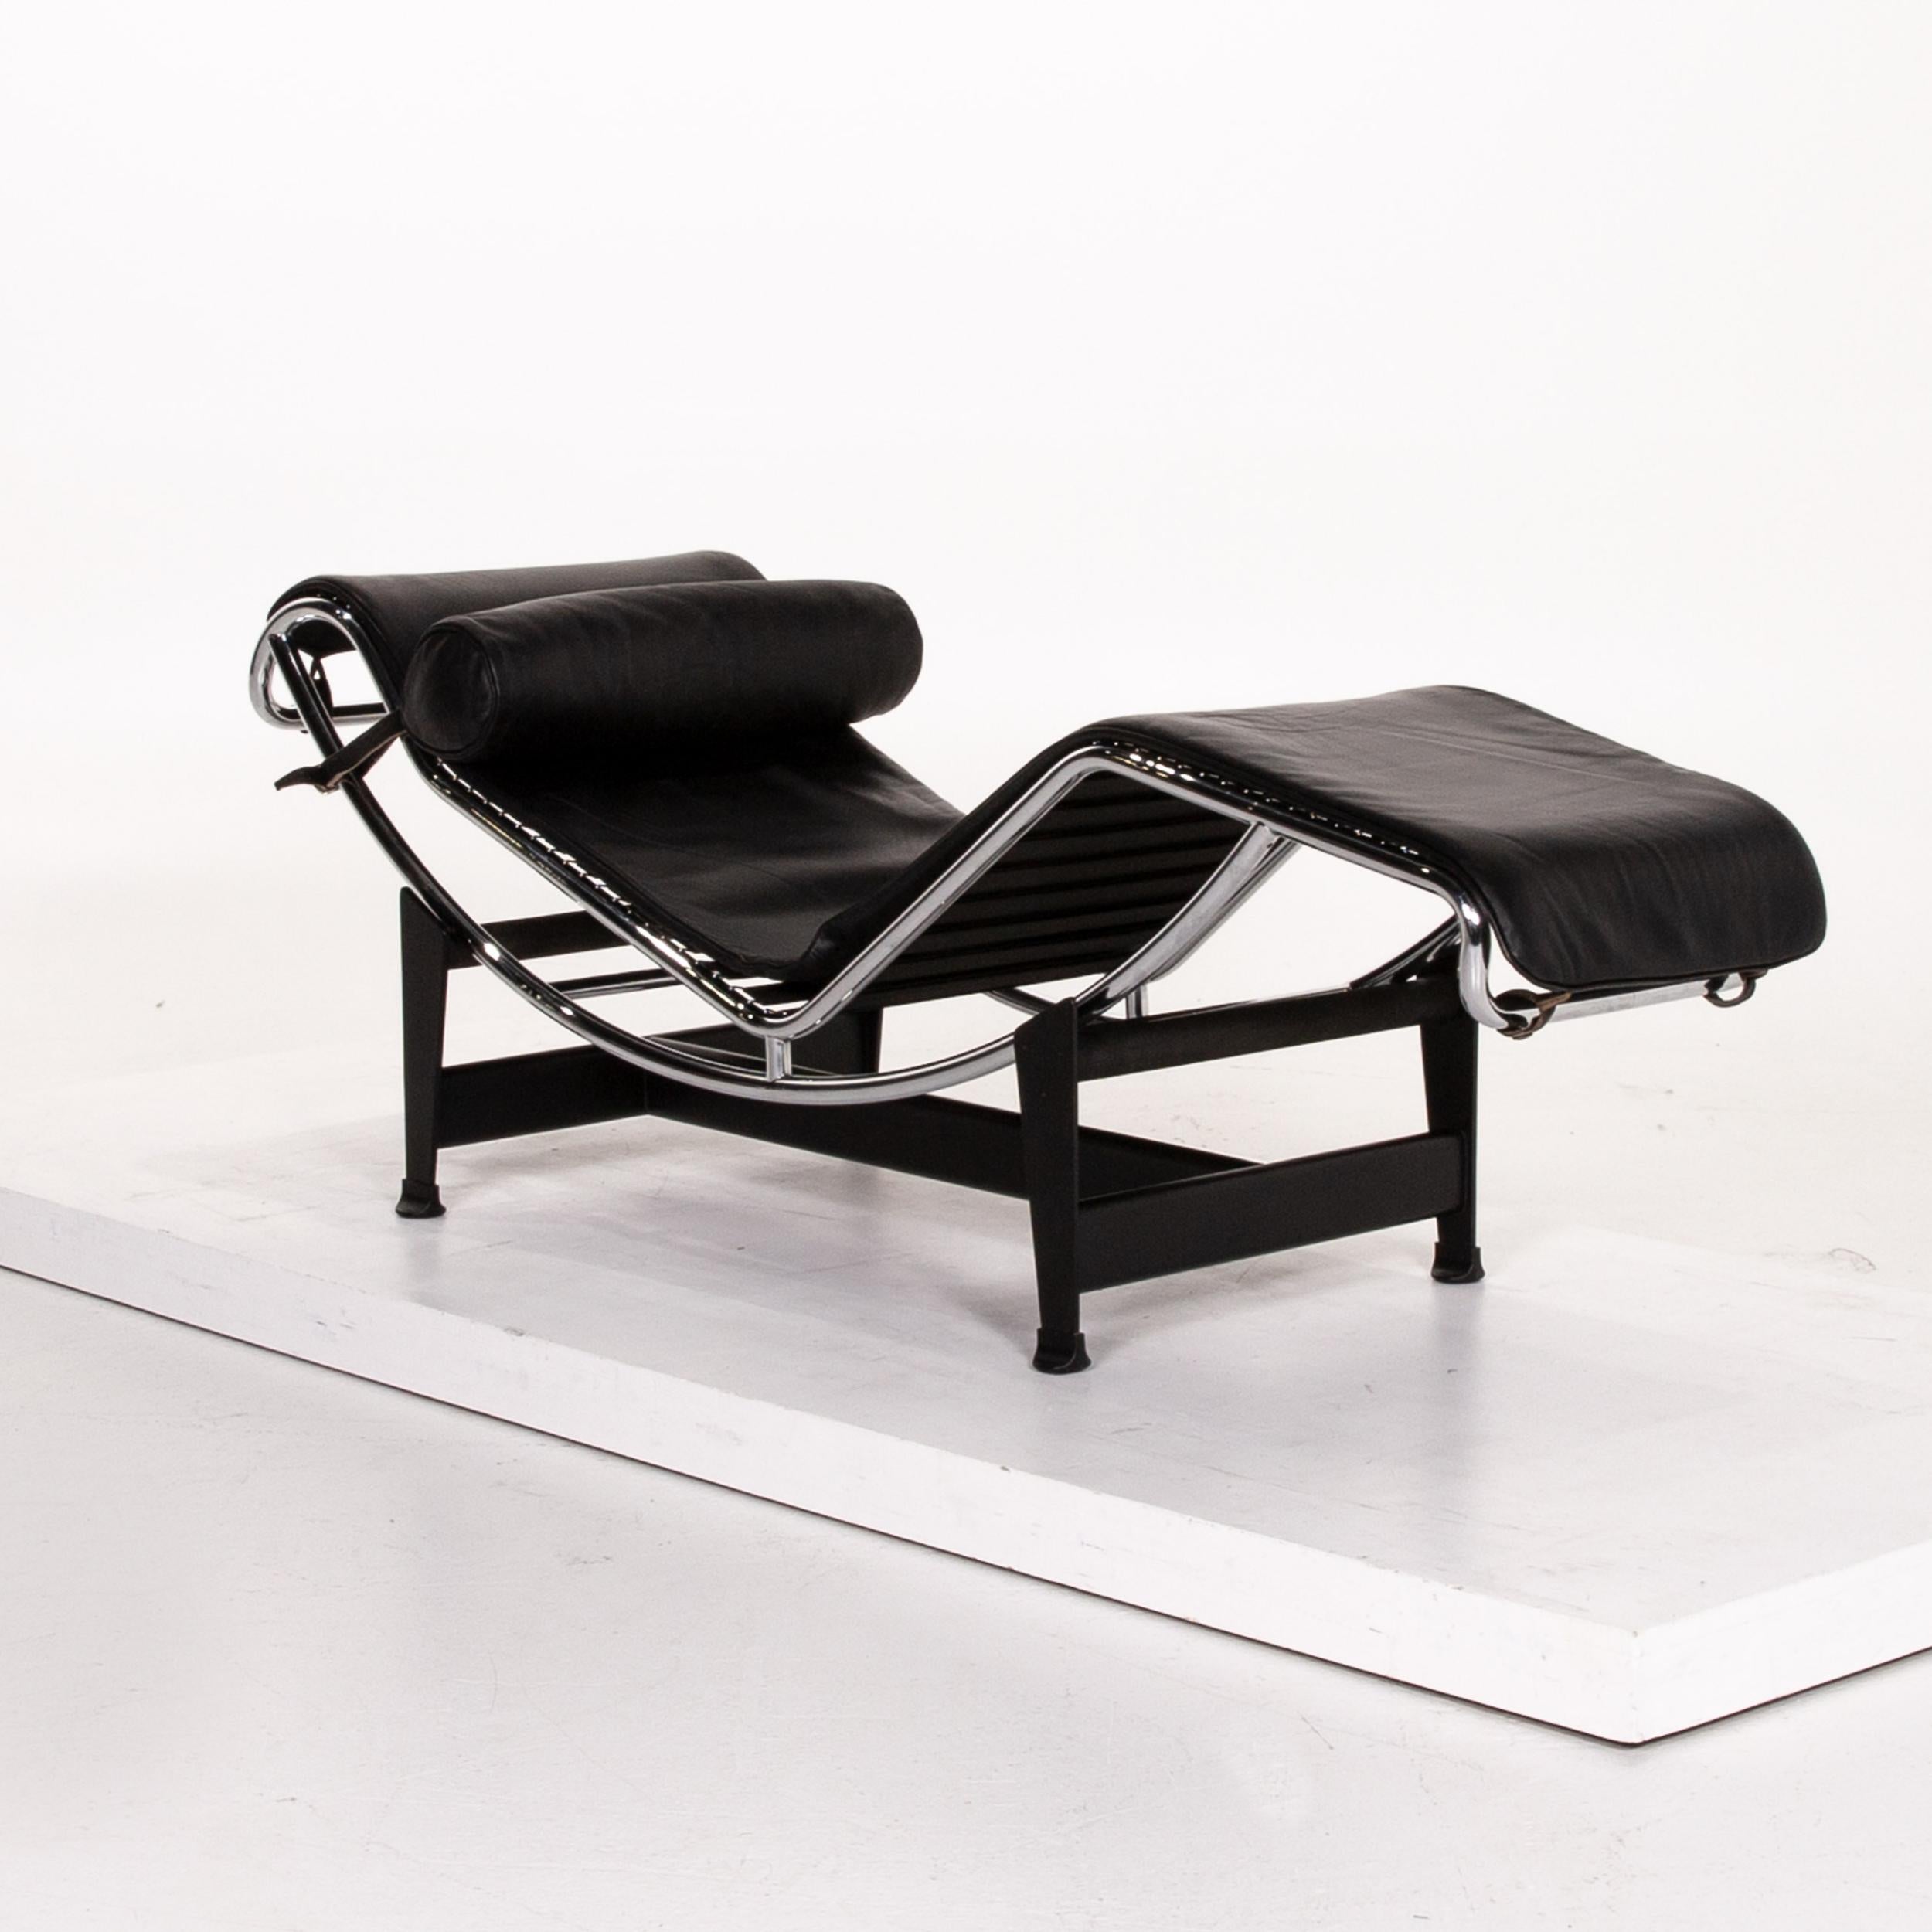 Modern Cassina Le Corbusier LC 4 Leather Lounger Black Relax Lounger Relax Function For Sale